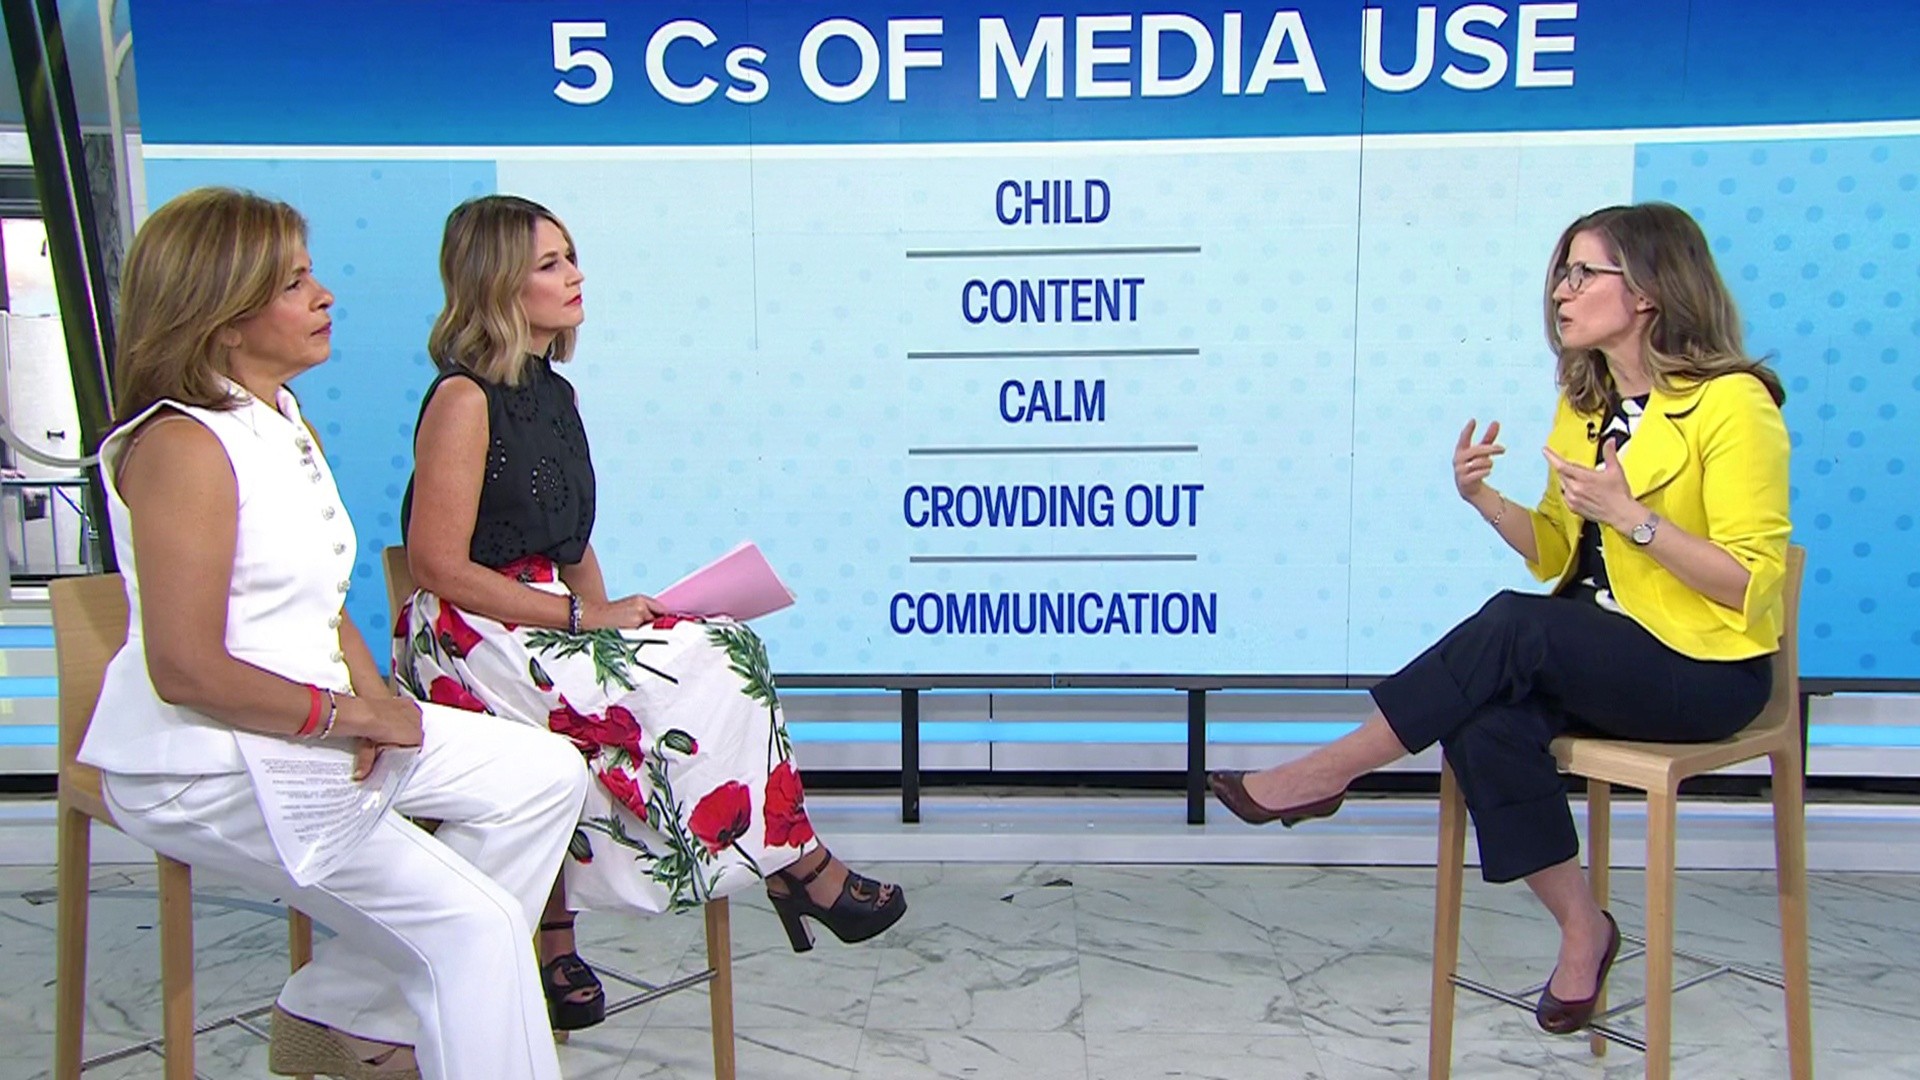 The 5 C's of media use: How to manage screen time for your kids